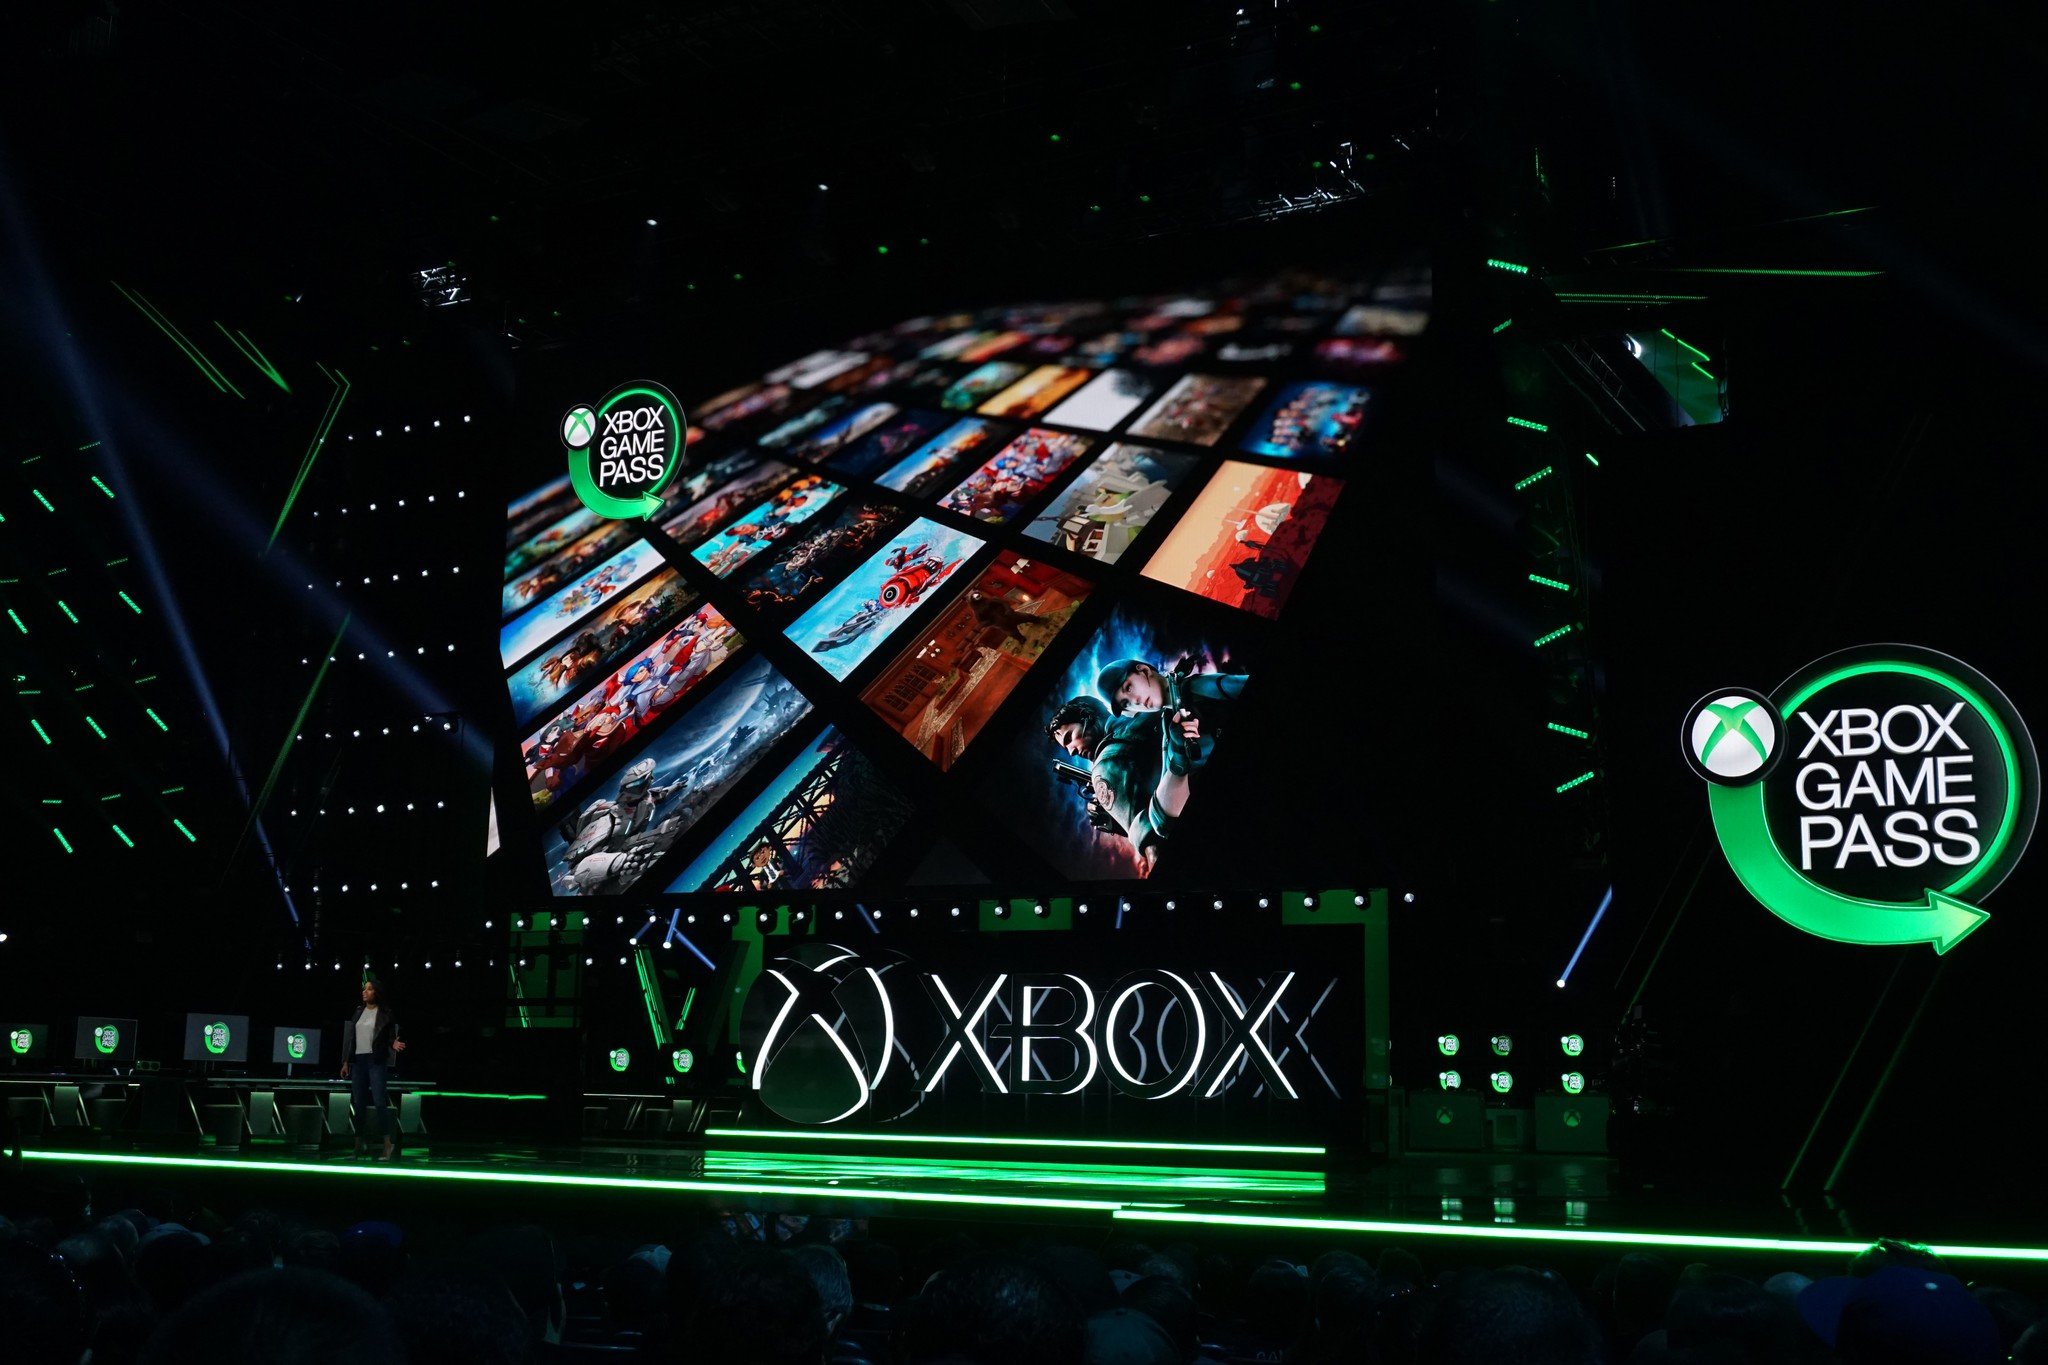 Xbox Game Pass E3 2019 Stage